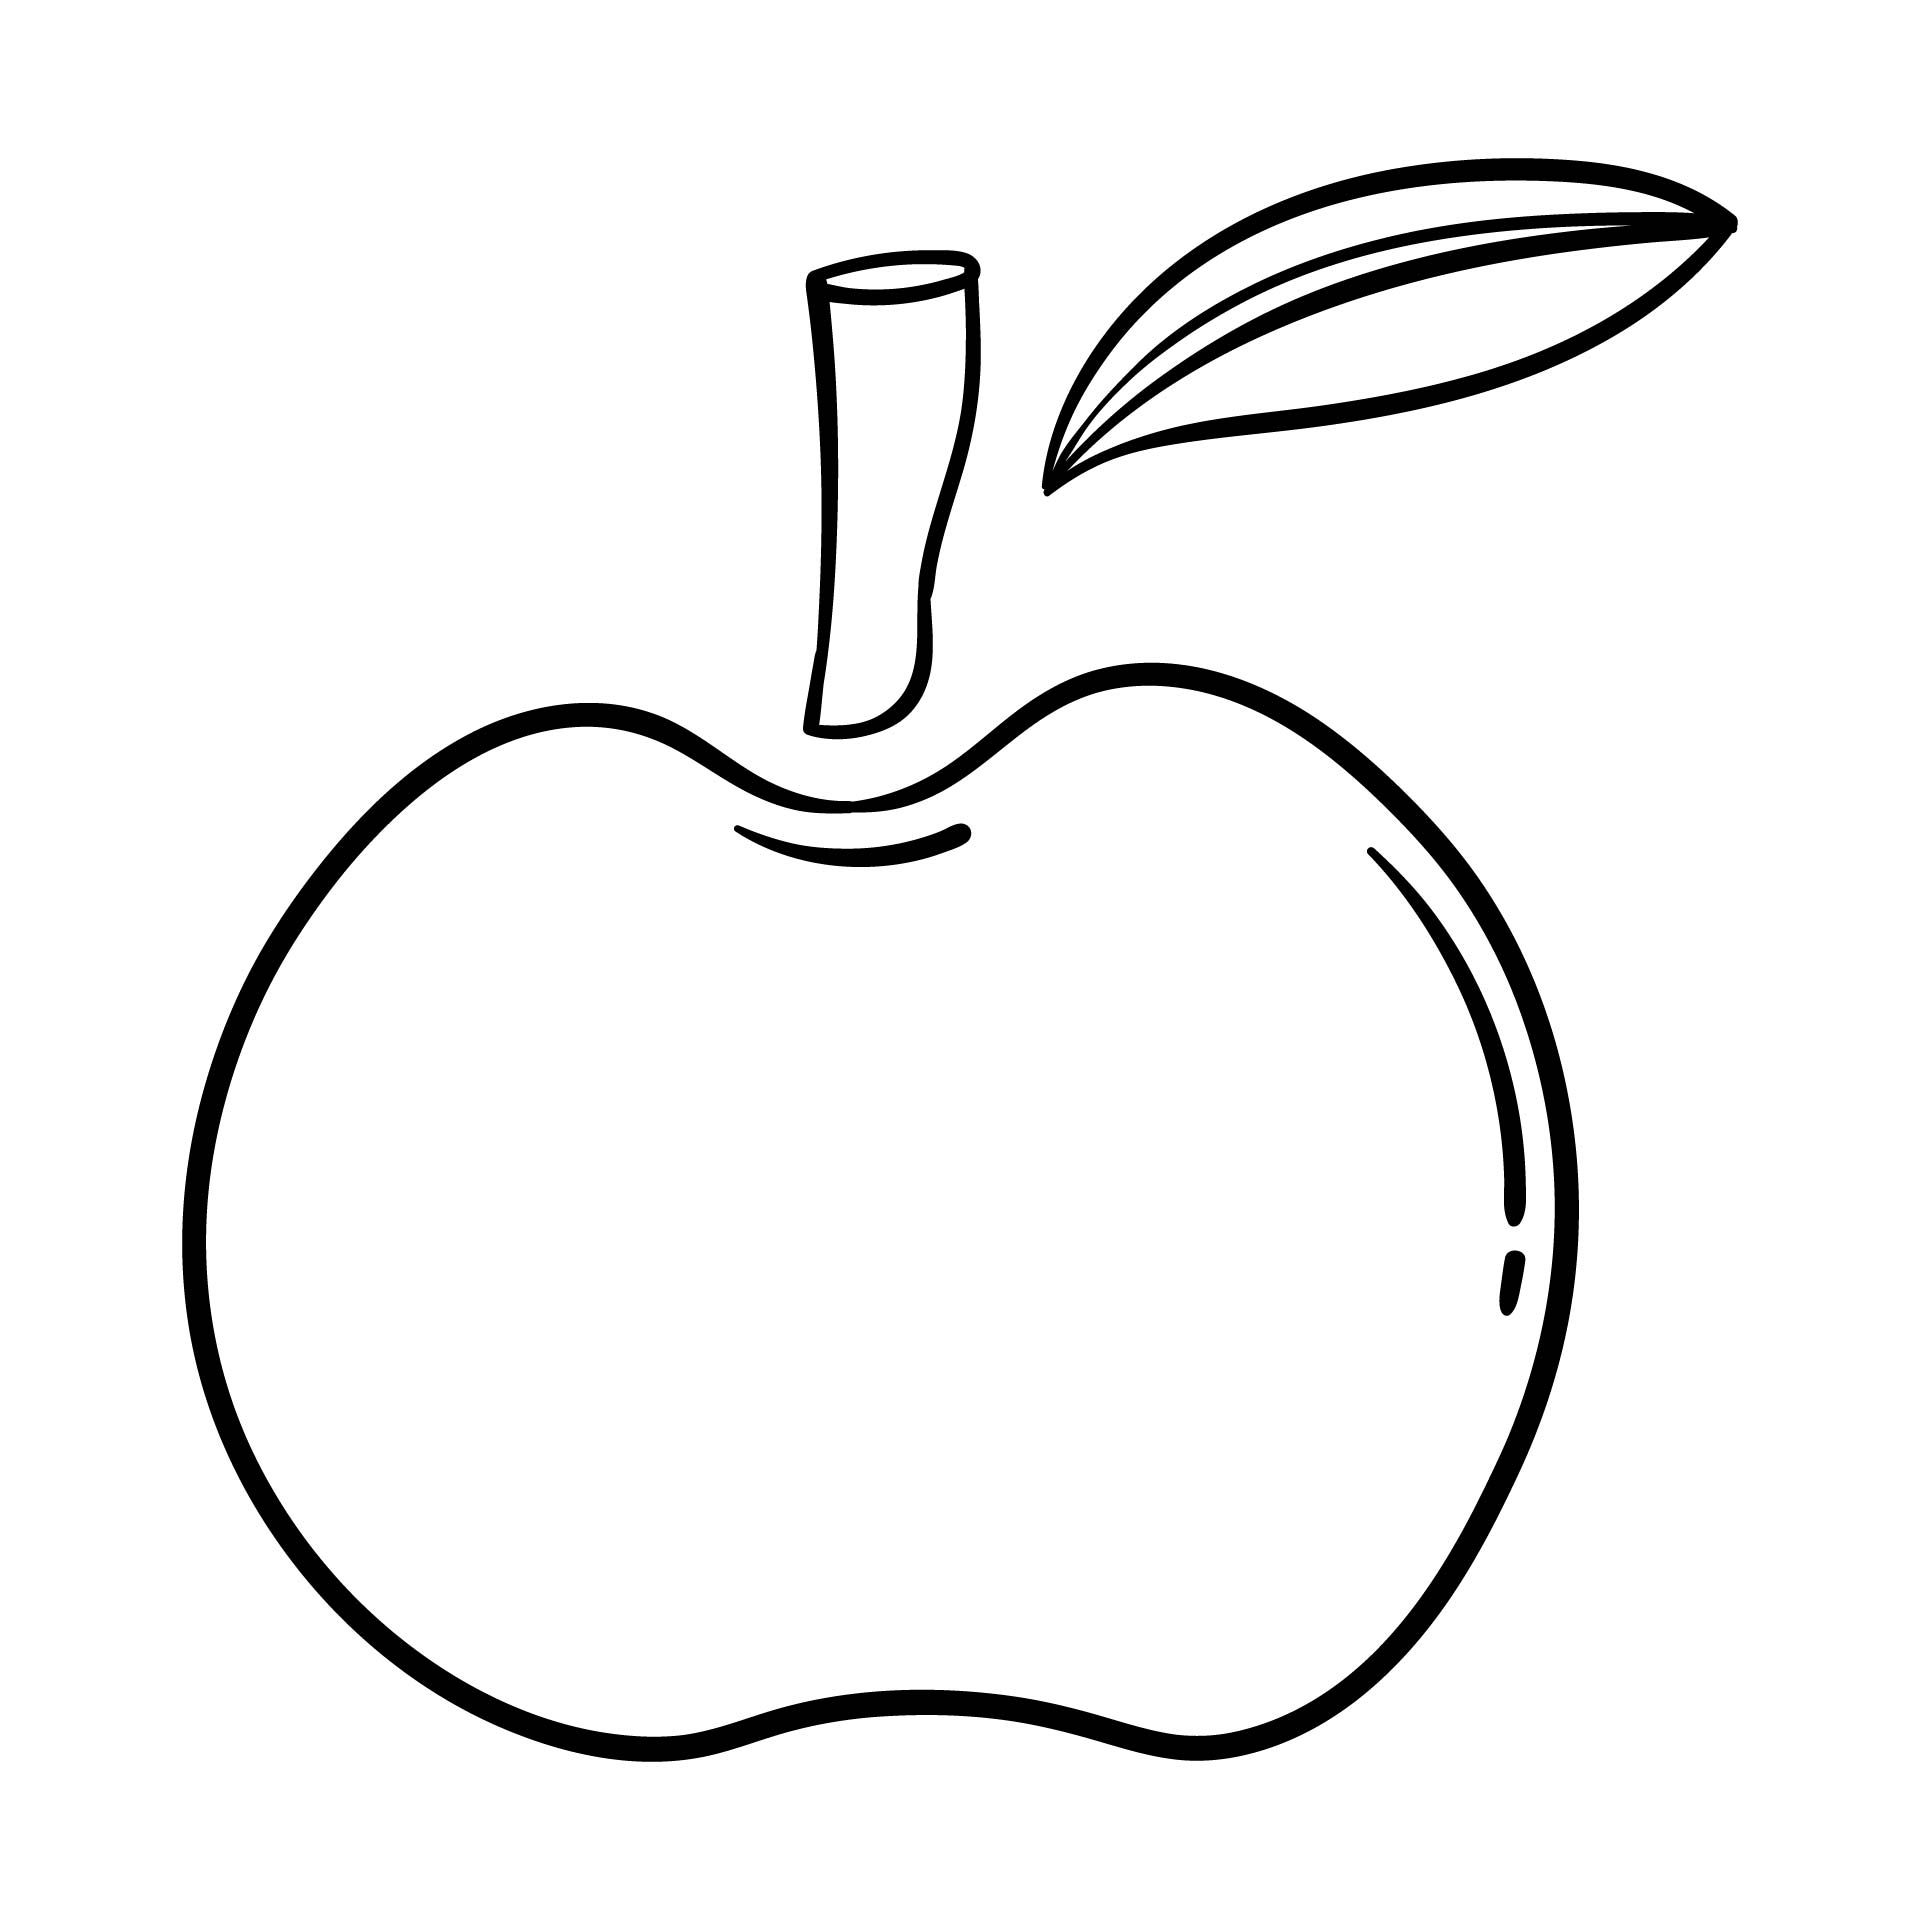 Printable Apple With Leaf And Stem Coloring Page